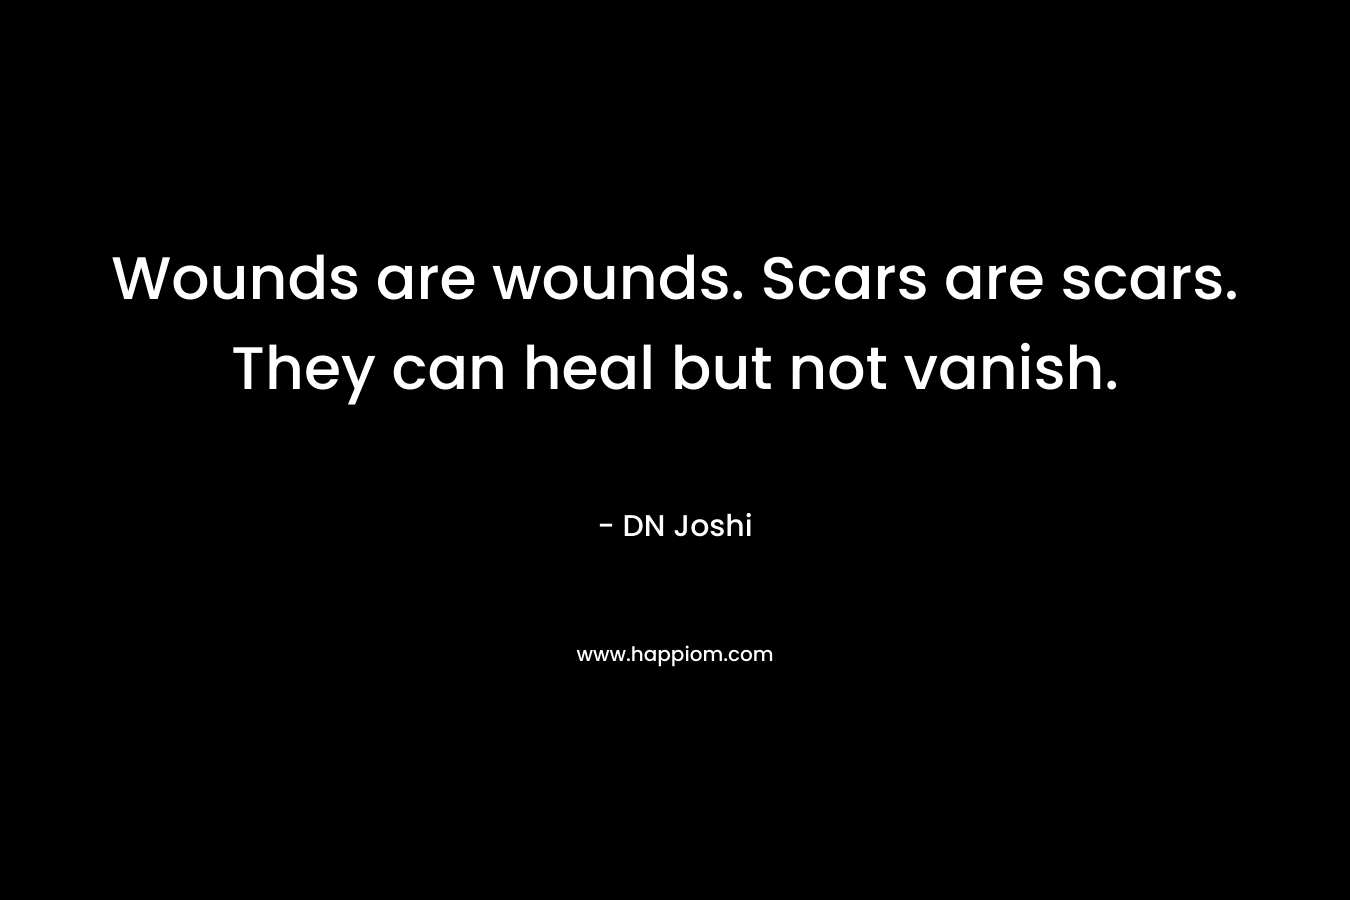 Wounds are wounds. Scars are scars. They can heal but not vanish. – DN Joshi